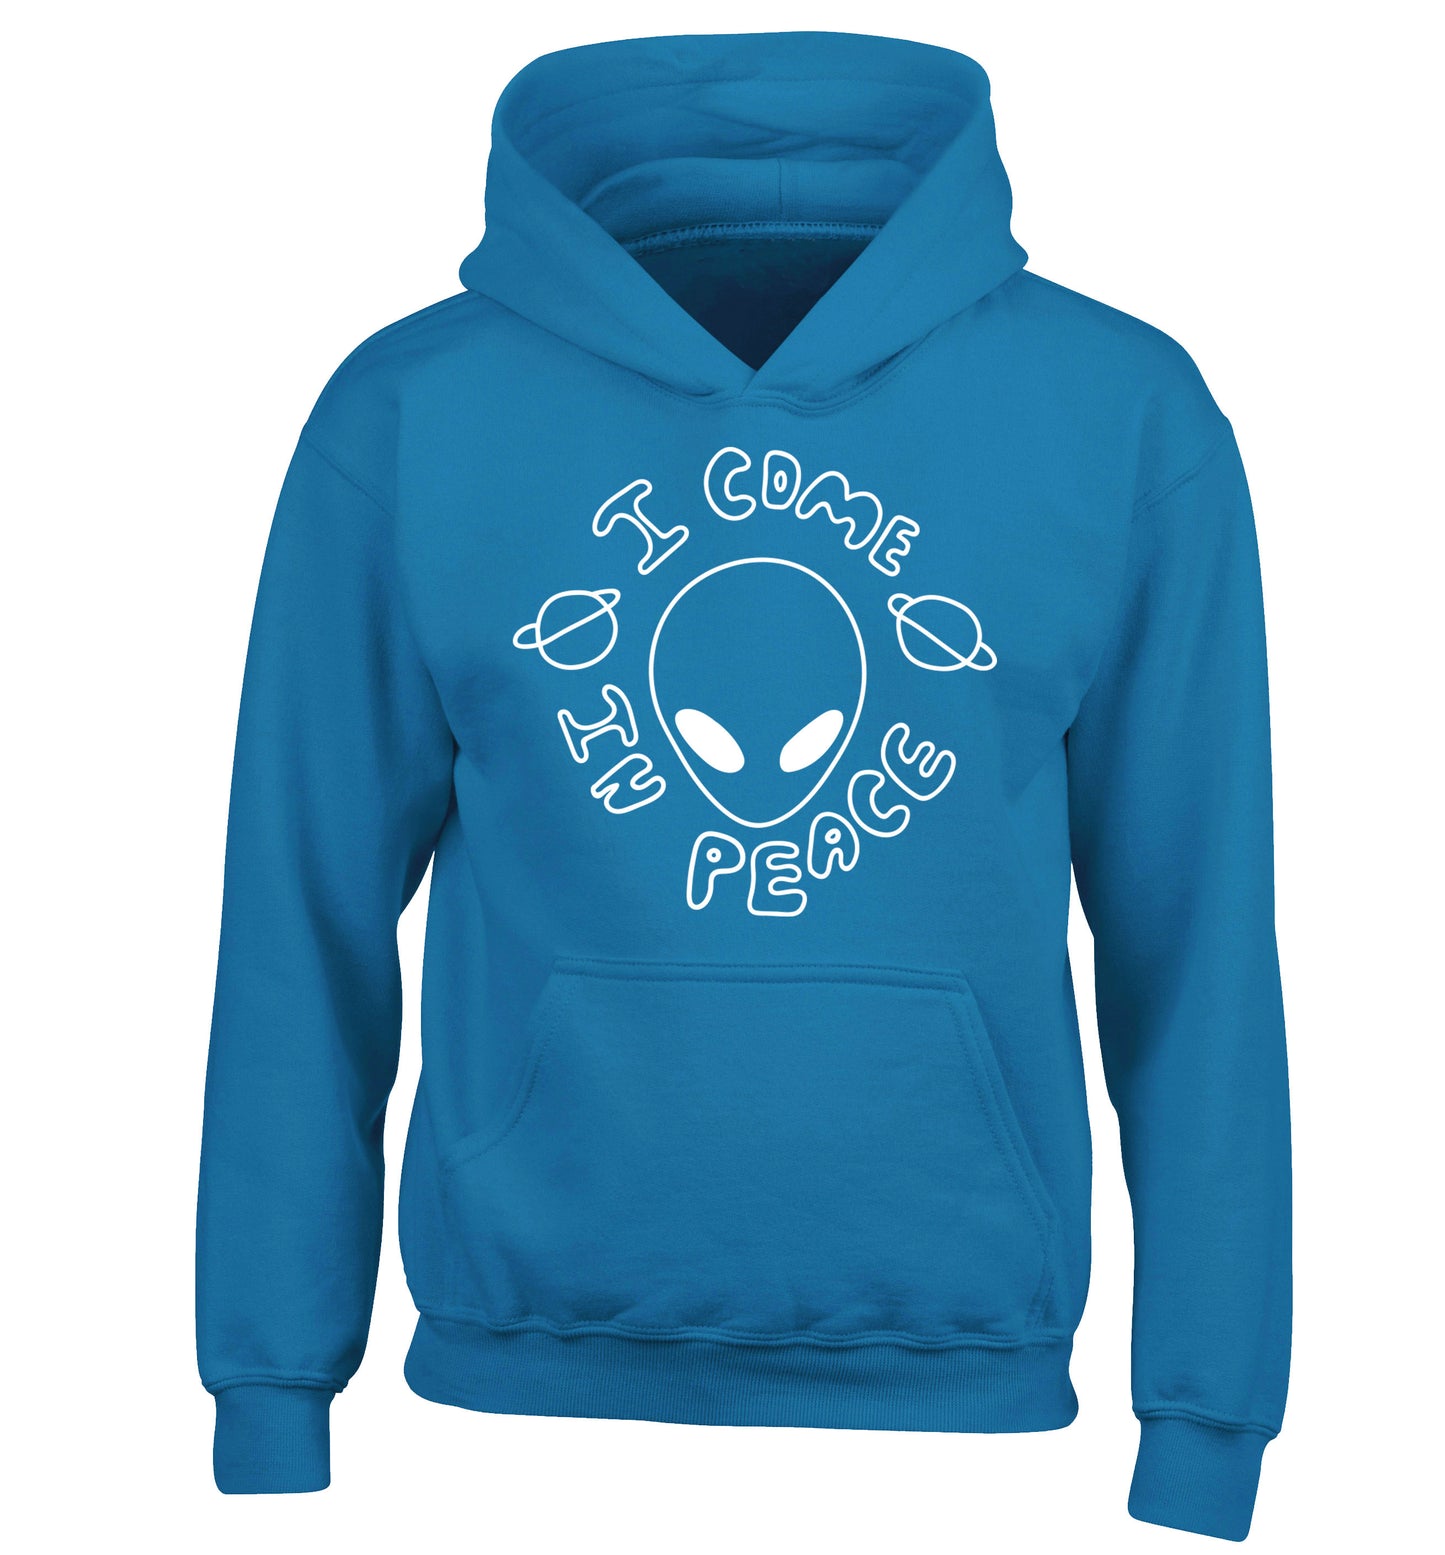 I come in peace children's blue hoodie 12-14 Years